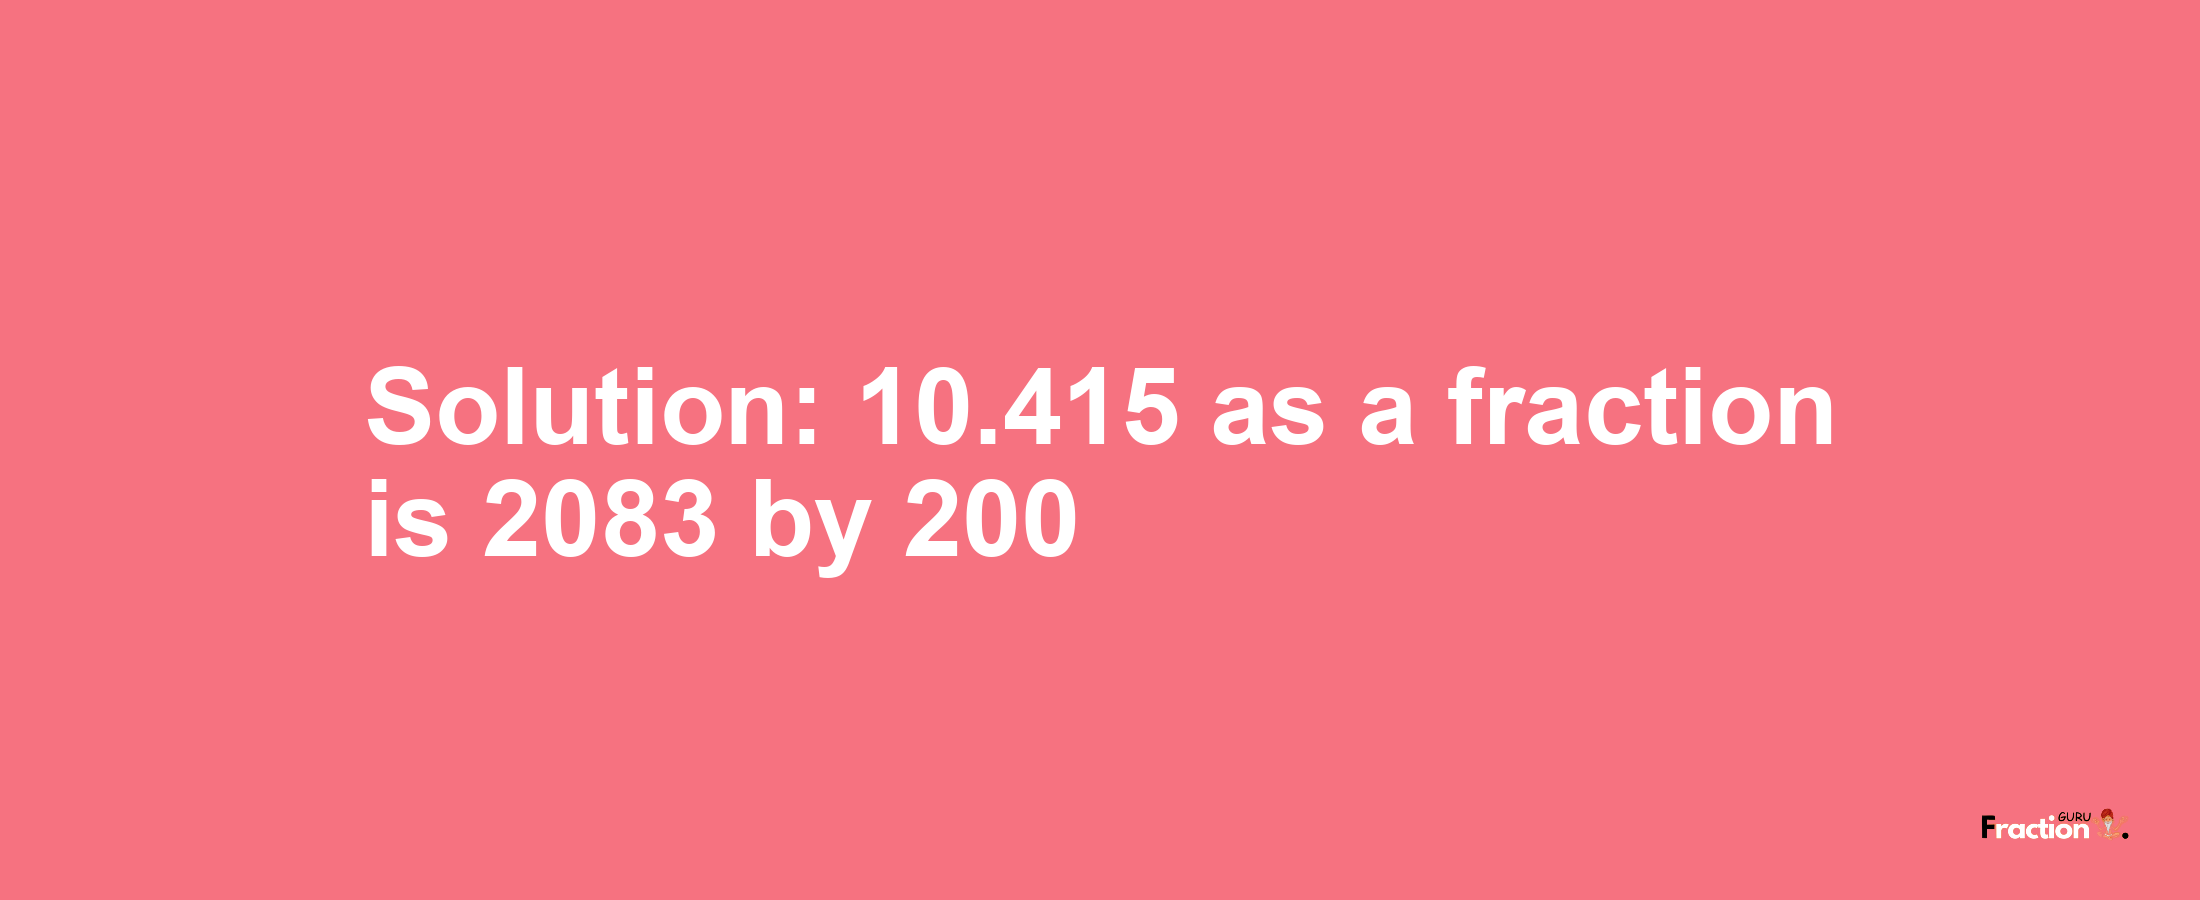 Solution:10.415 as a fraction is 2083/200